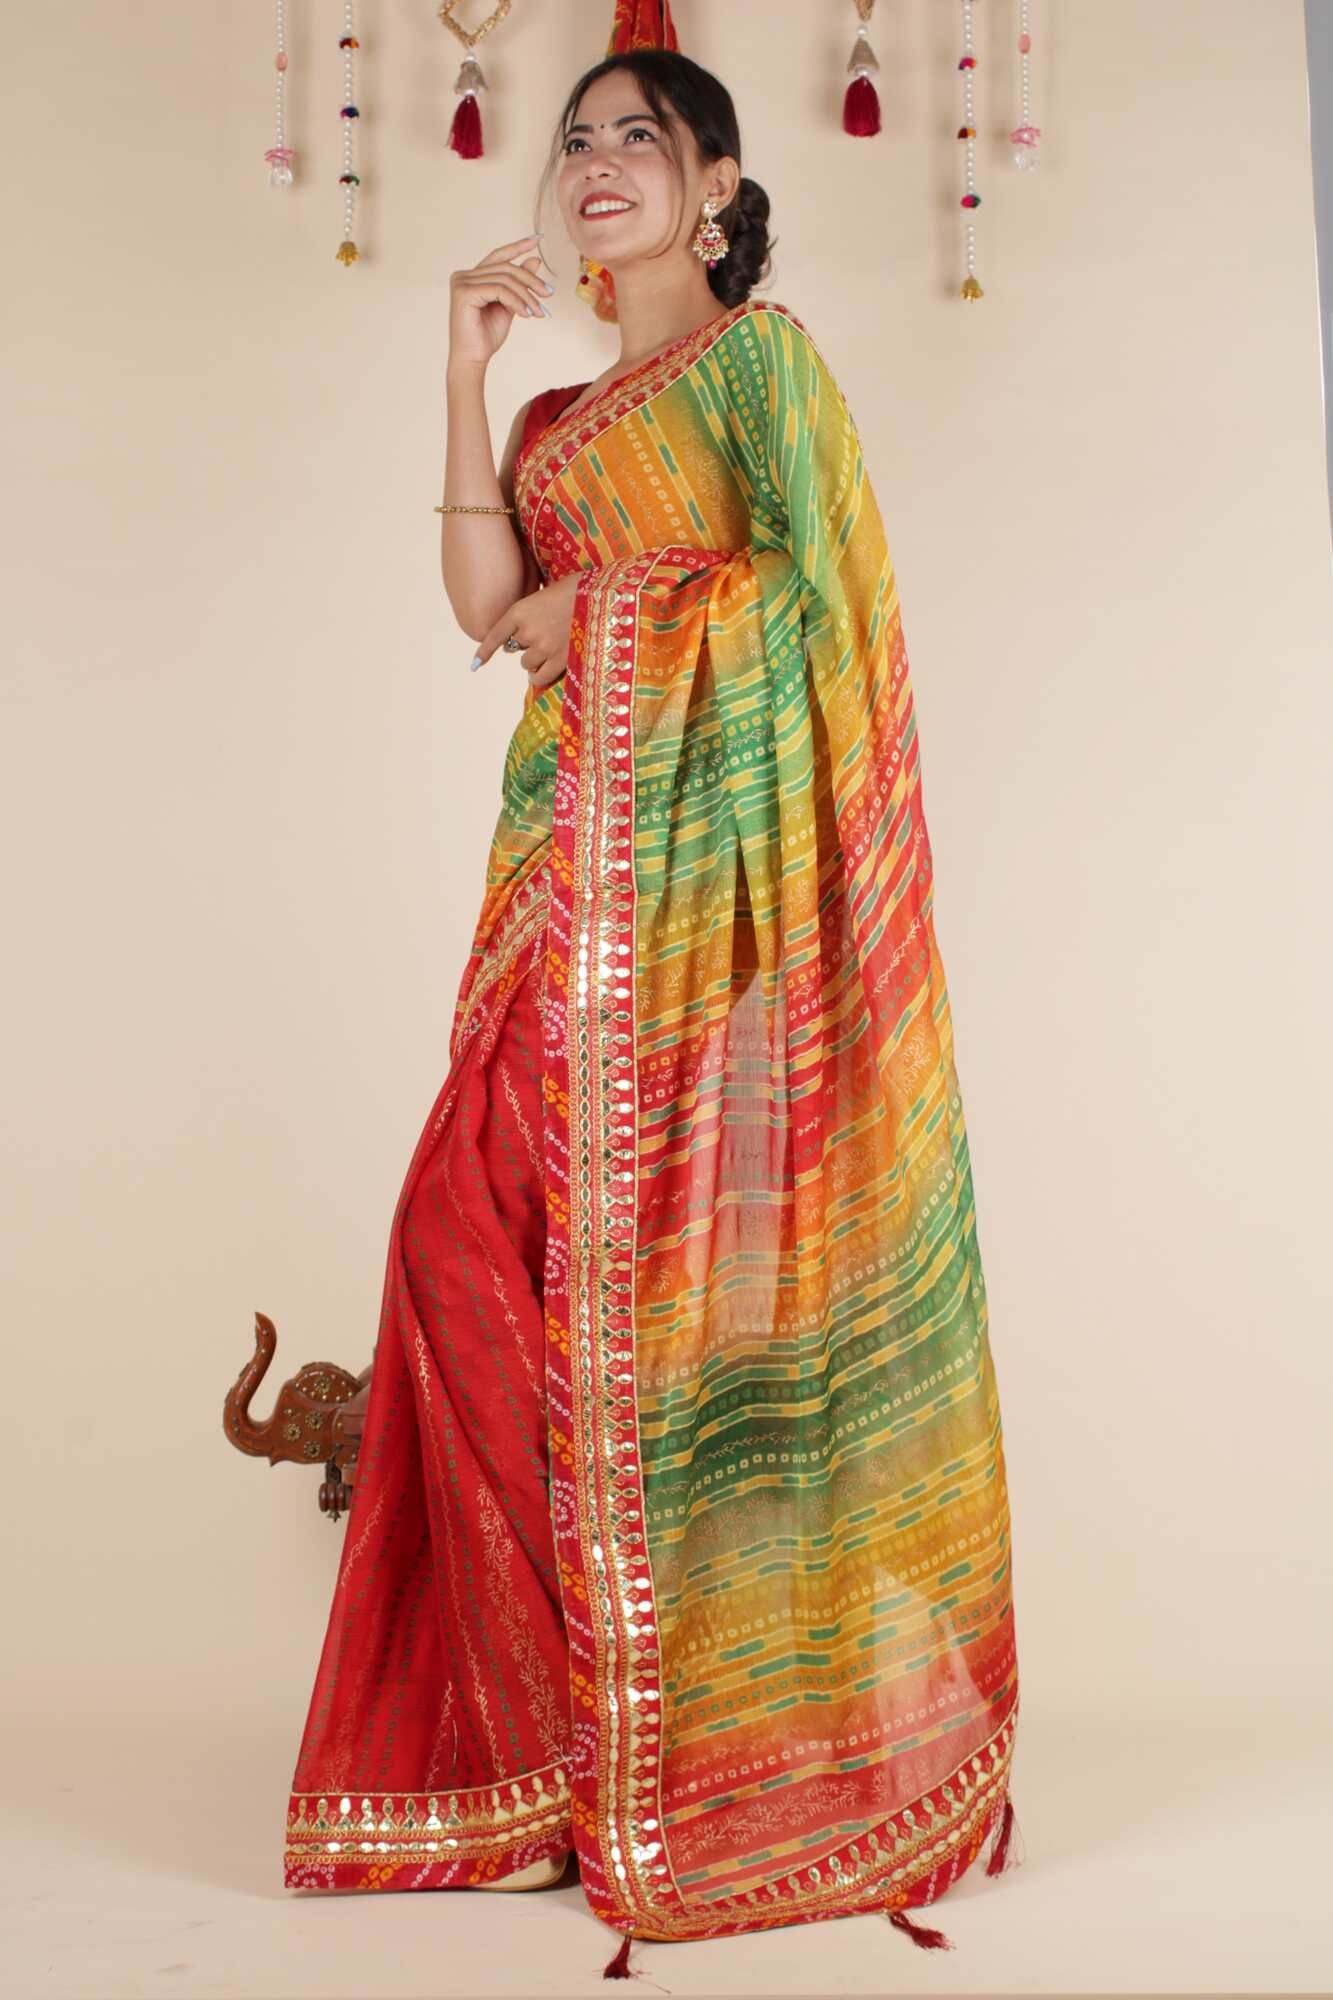 Prepossessing Bandhani With Gota Patti Border Wrap In One Minute Saree With Readymade Blouse - Isadora Life Online Shopping Store